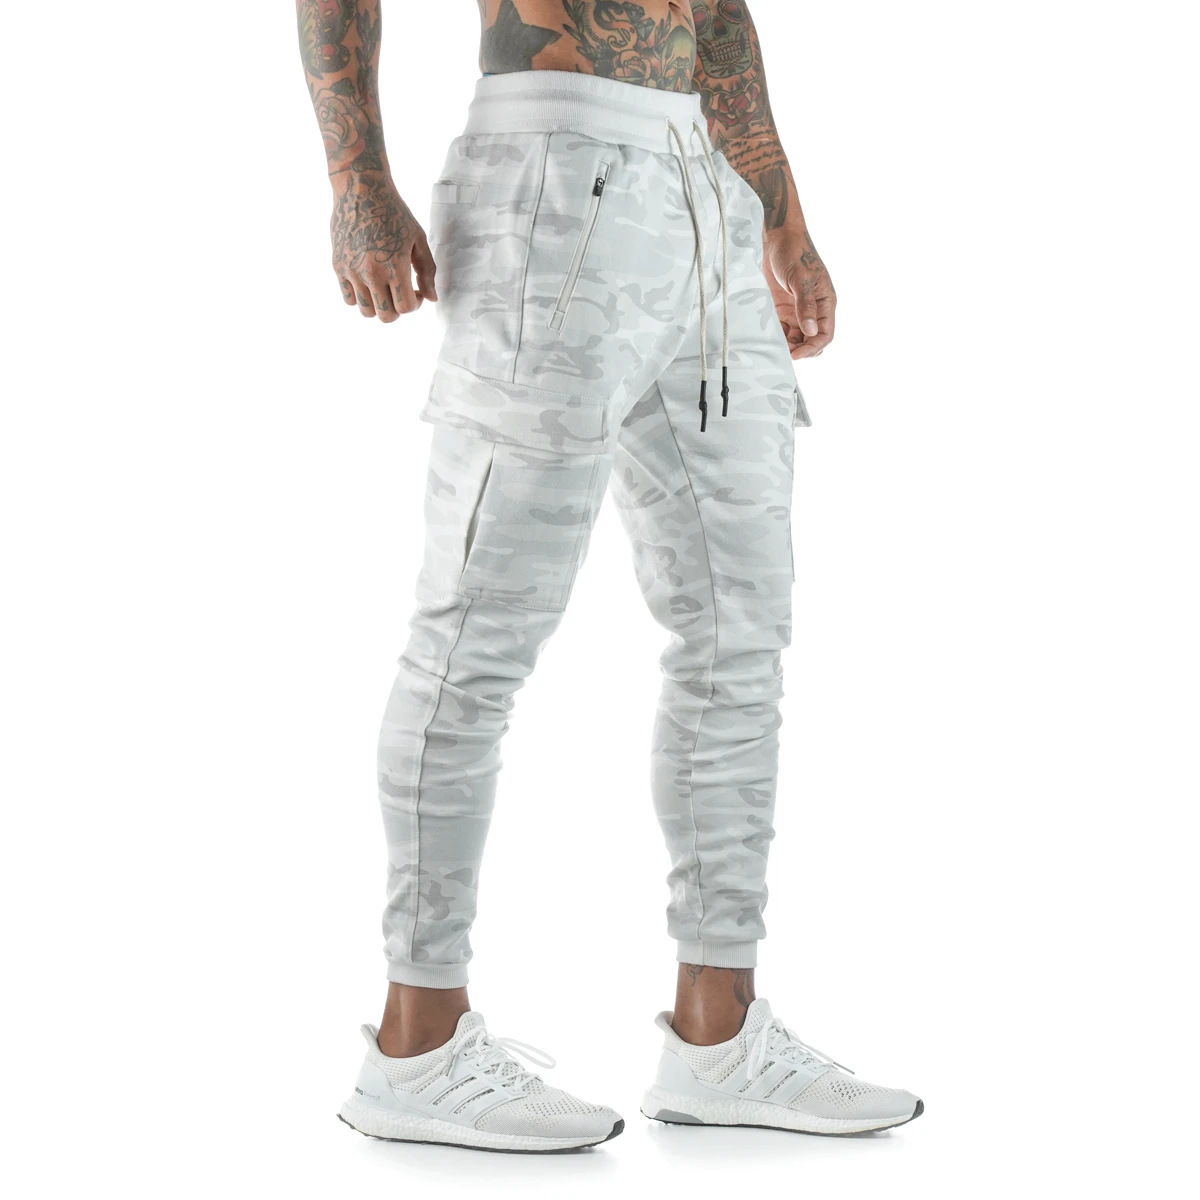 men's Trousers 2023 new gym Camouflage sports casual pants 男装 休闲裤 原图主图